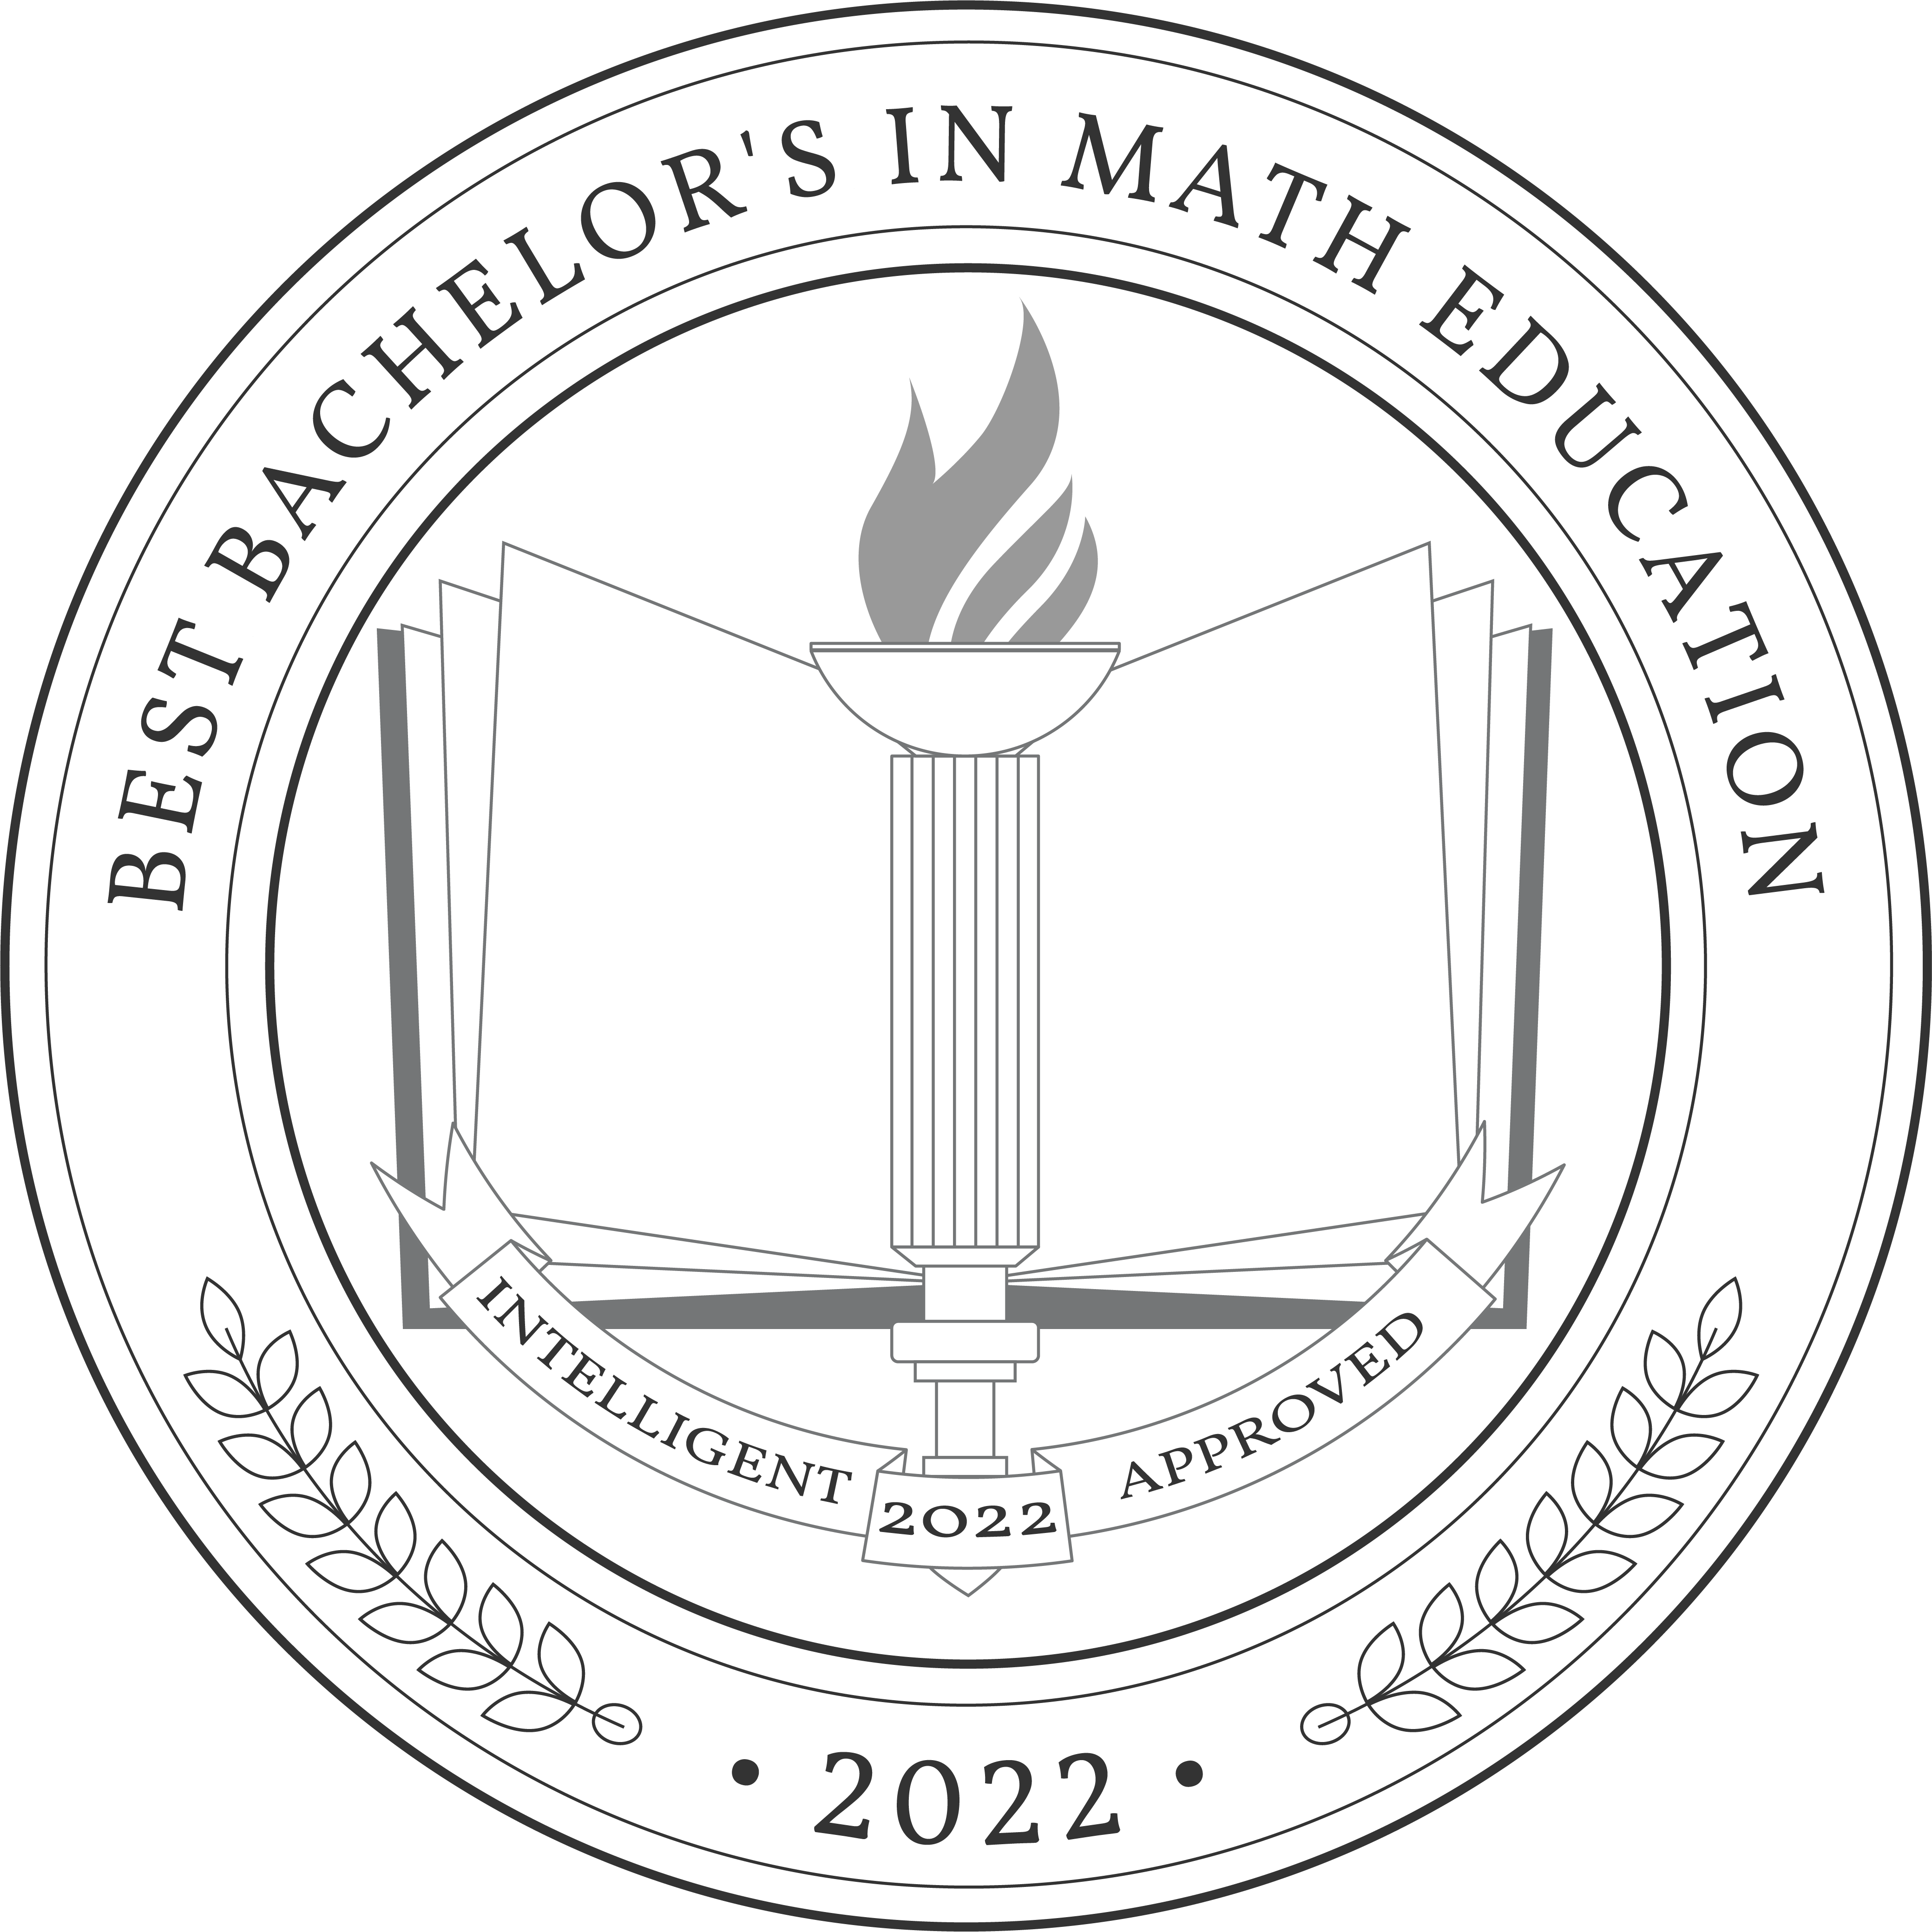 Best Bachelor's in Math Education Badge